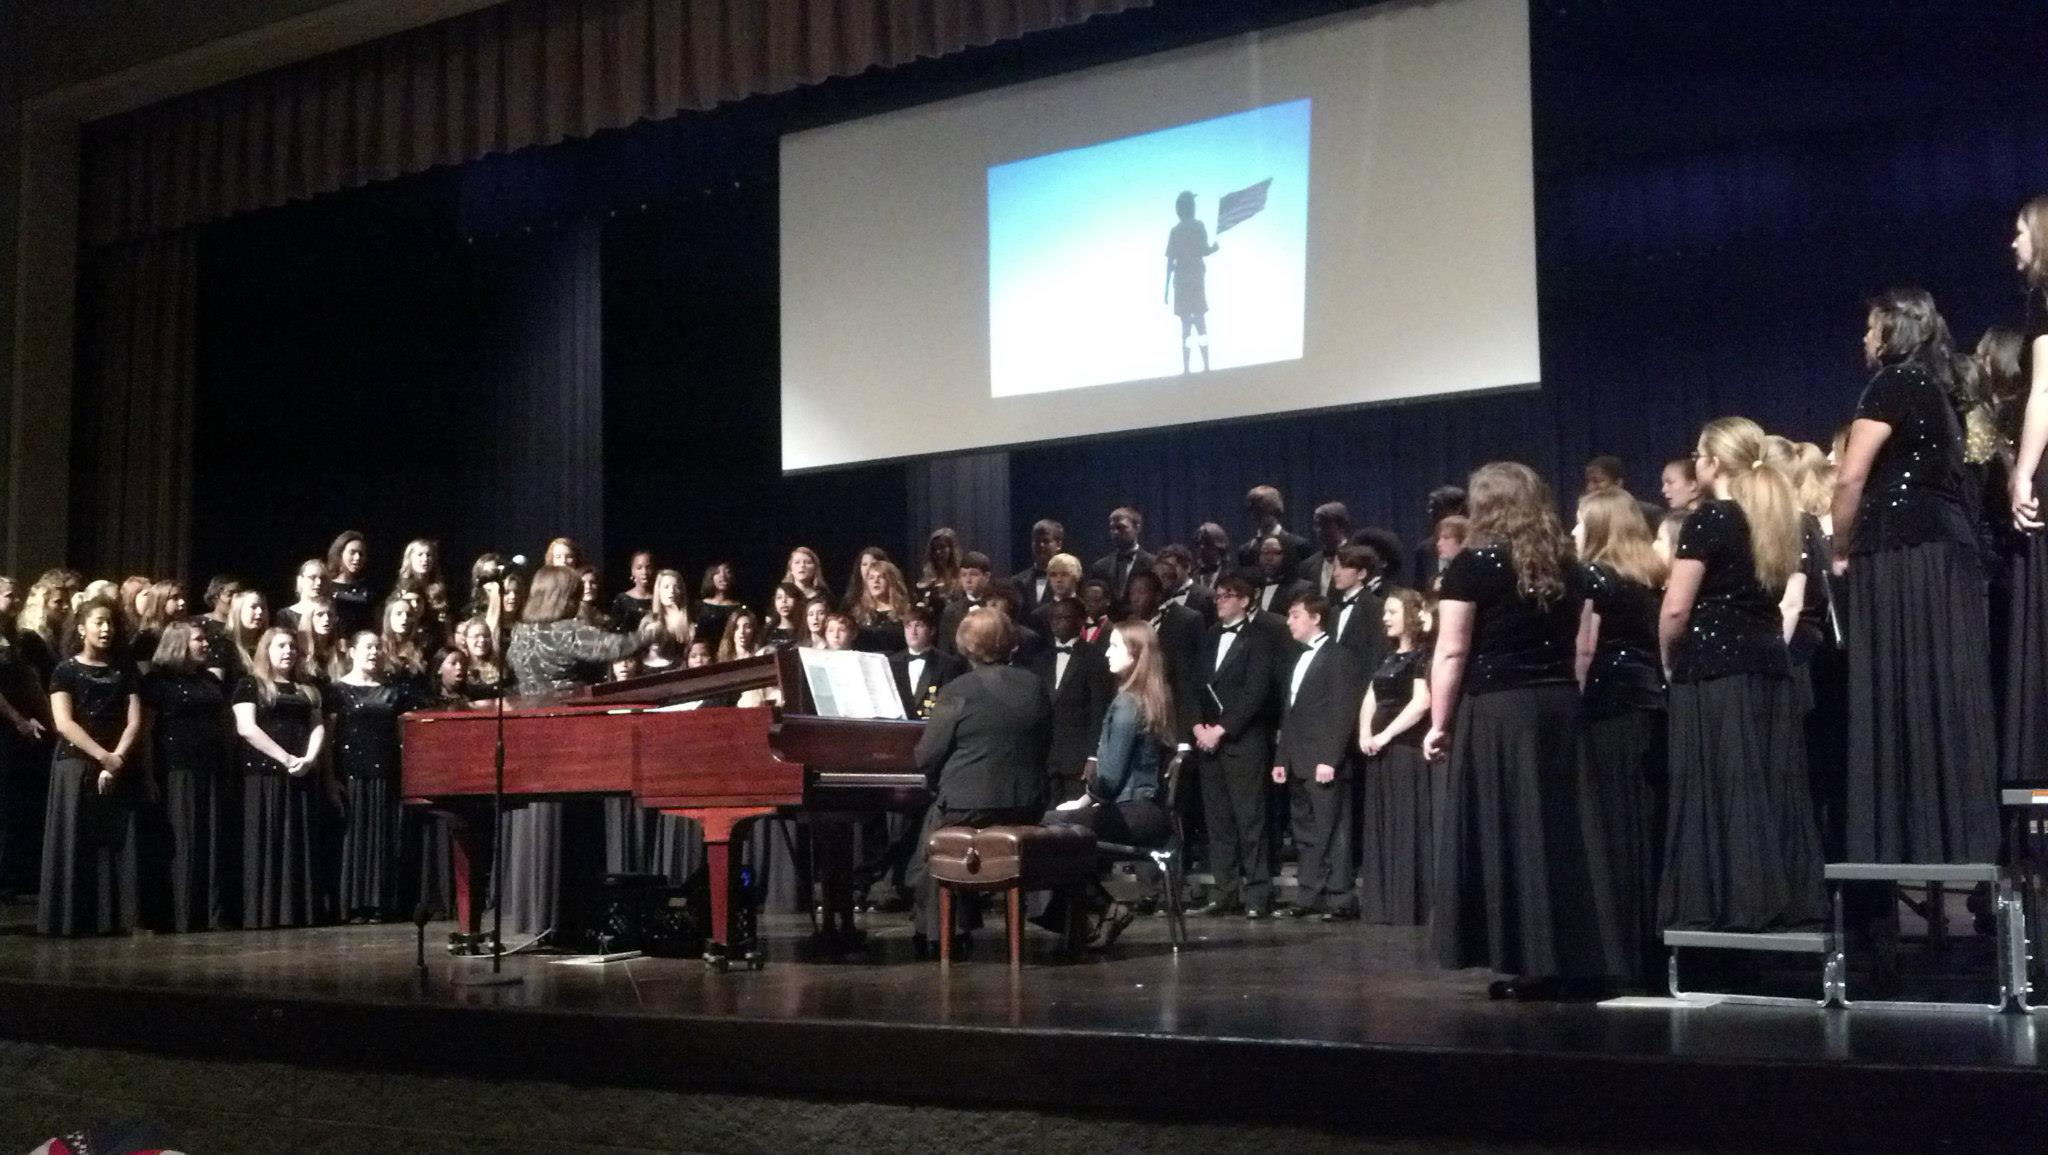 Choir with Veteran's Day photo in background